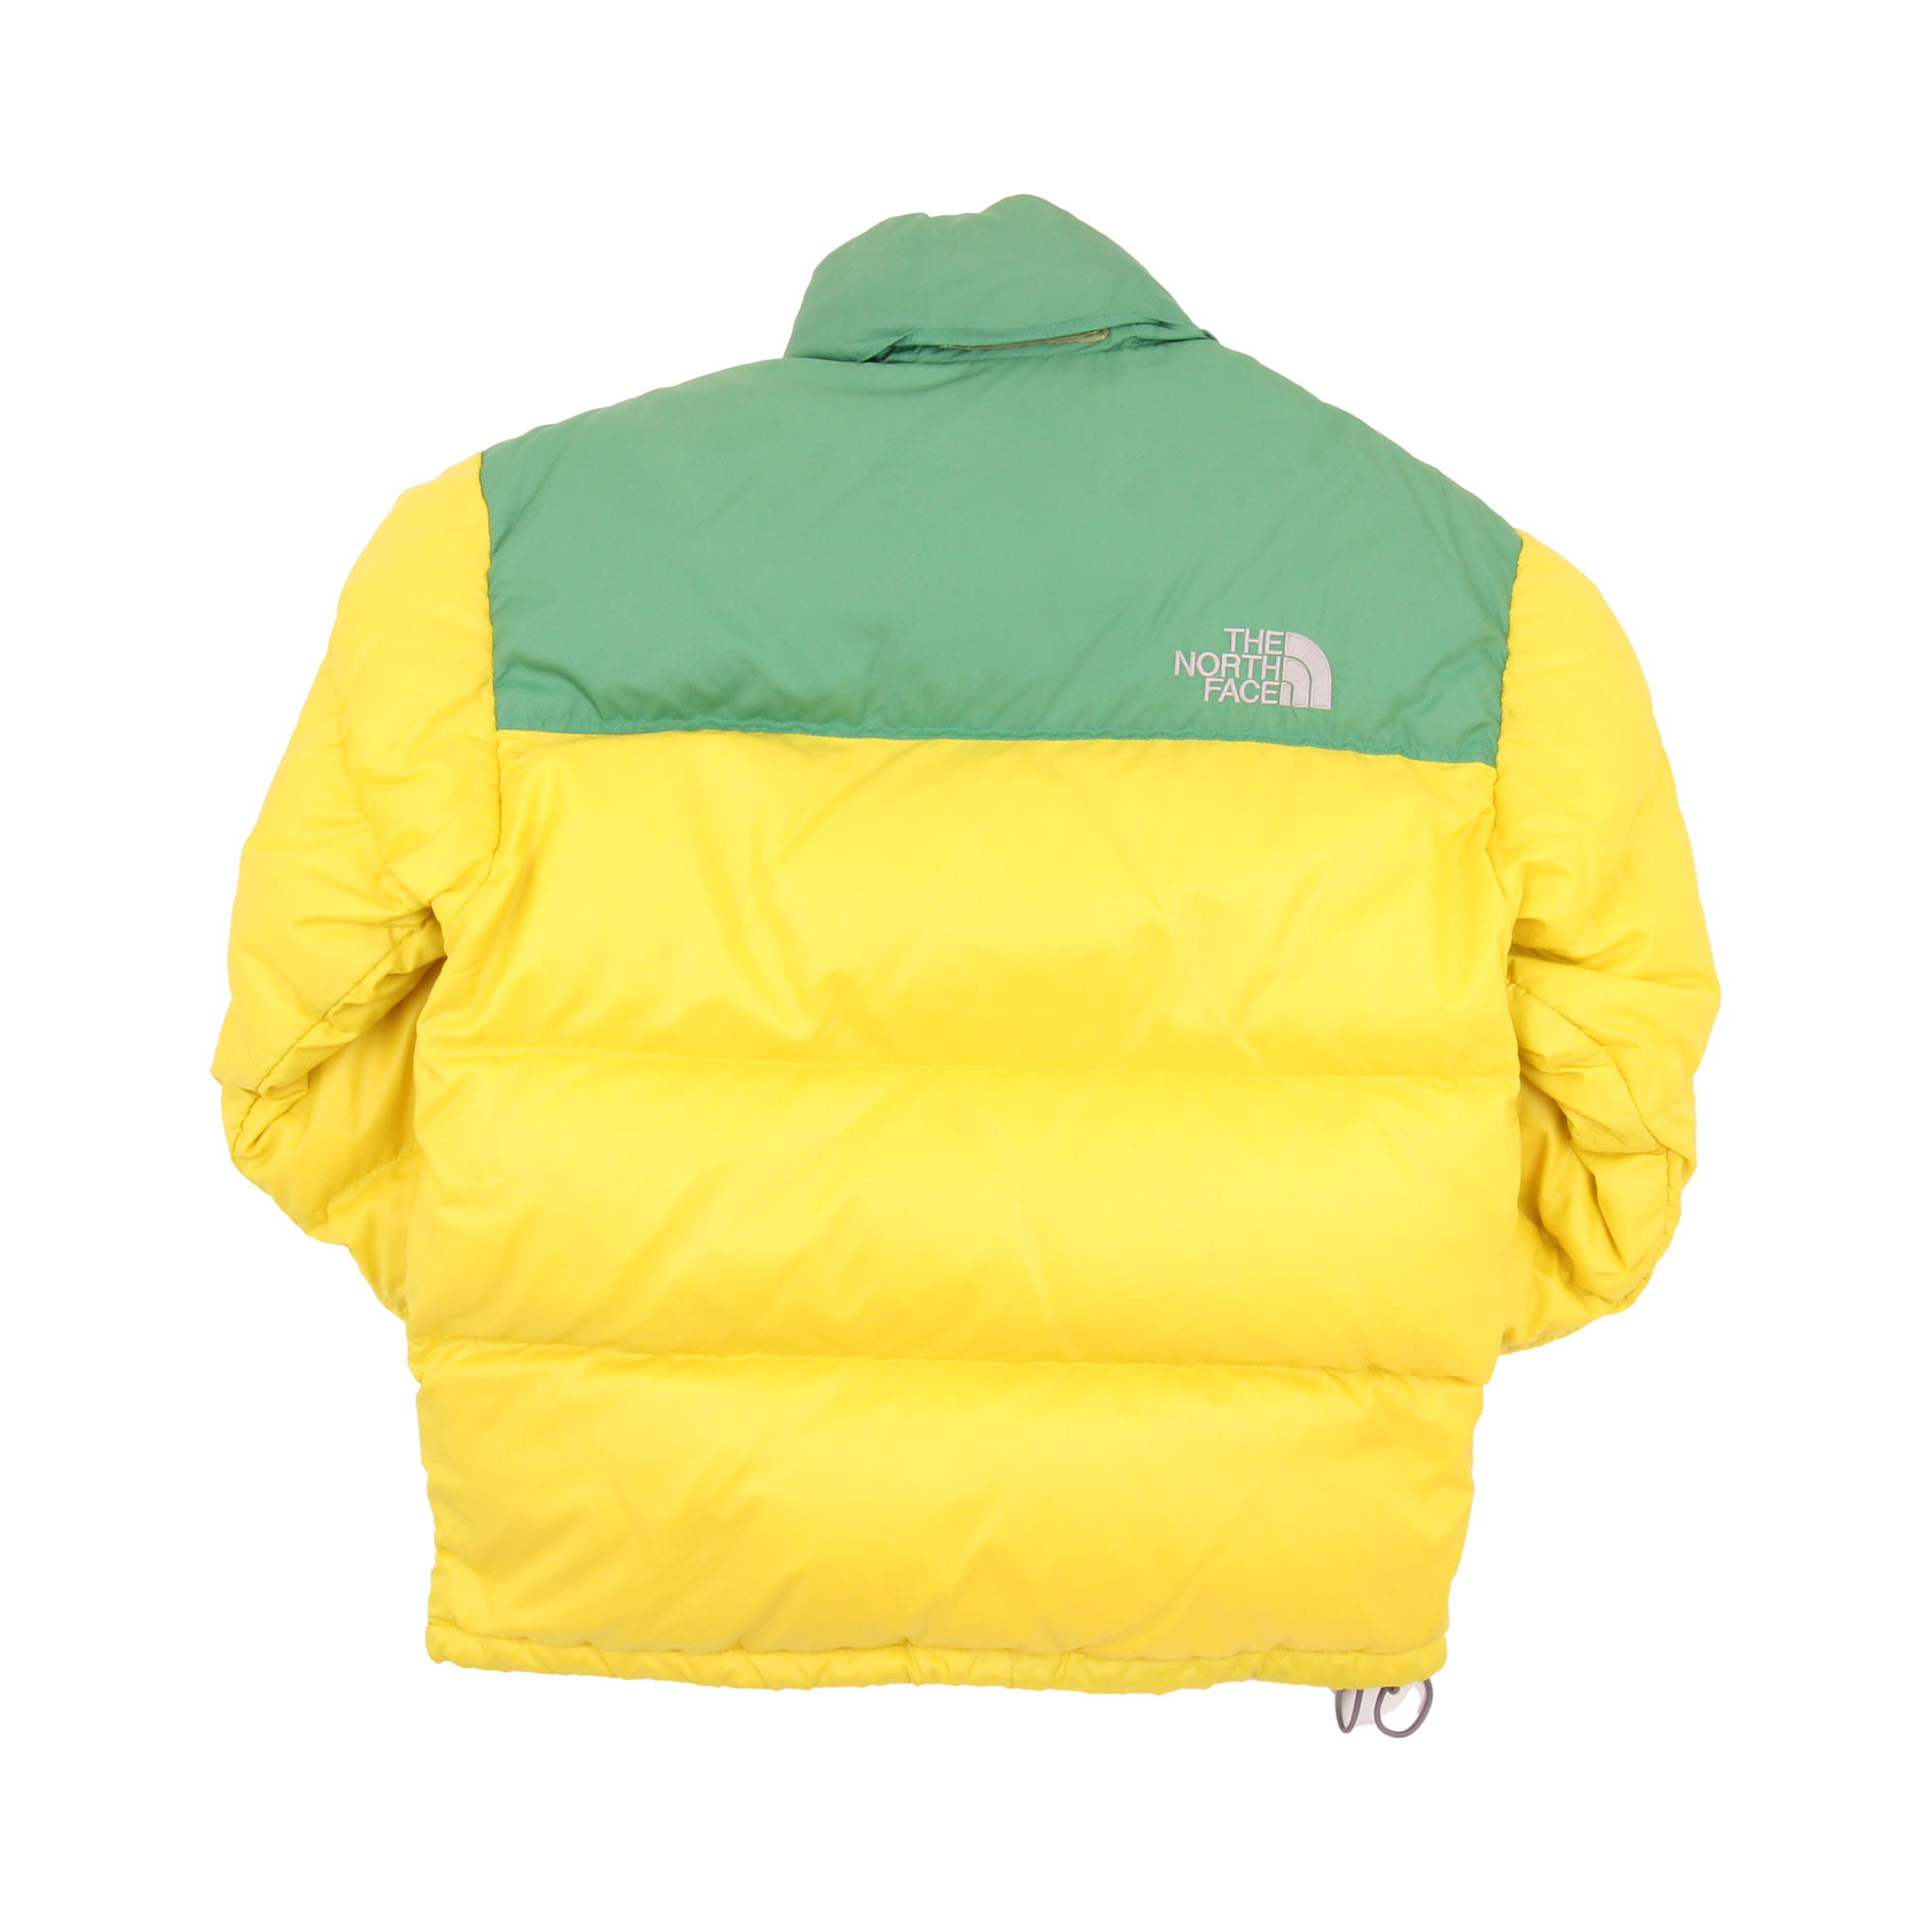 The North Face 700 Puffer Jacket -  M